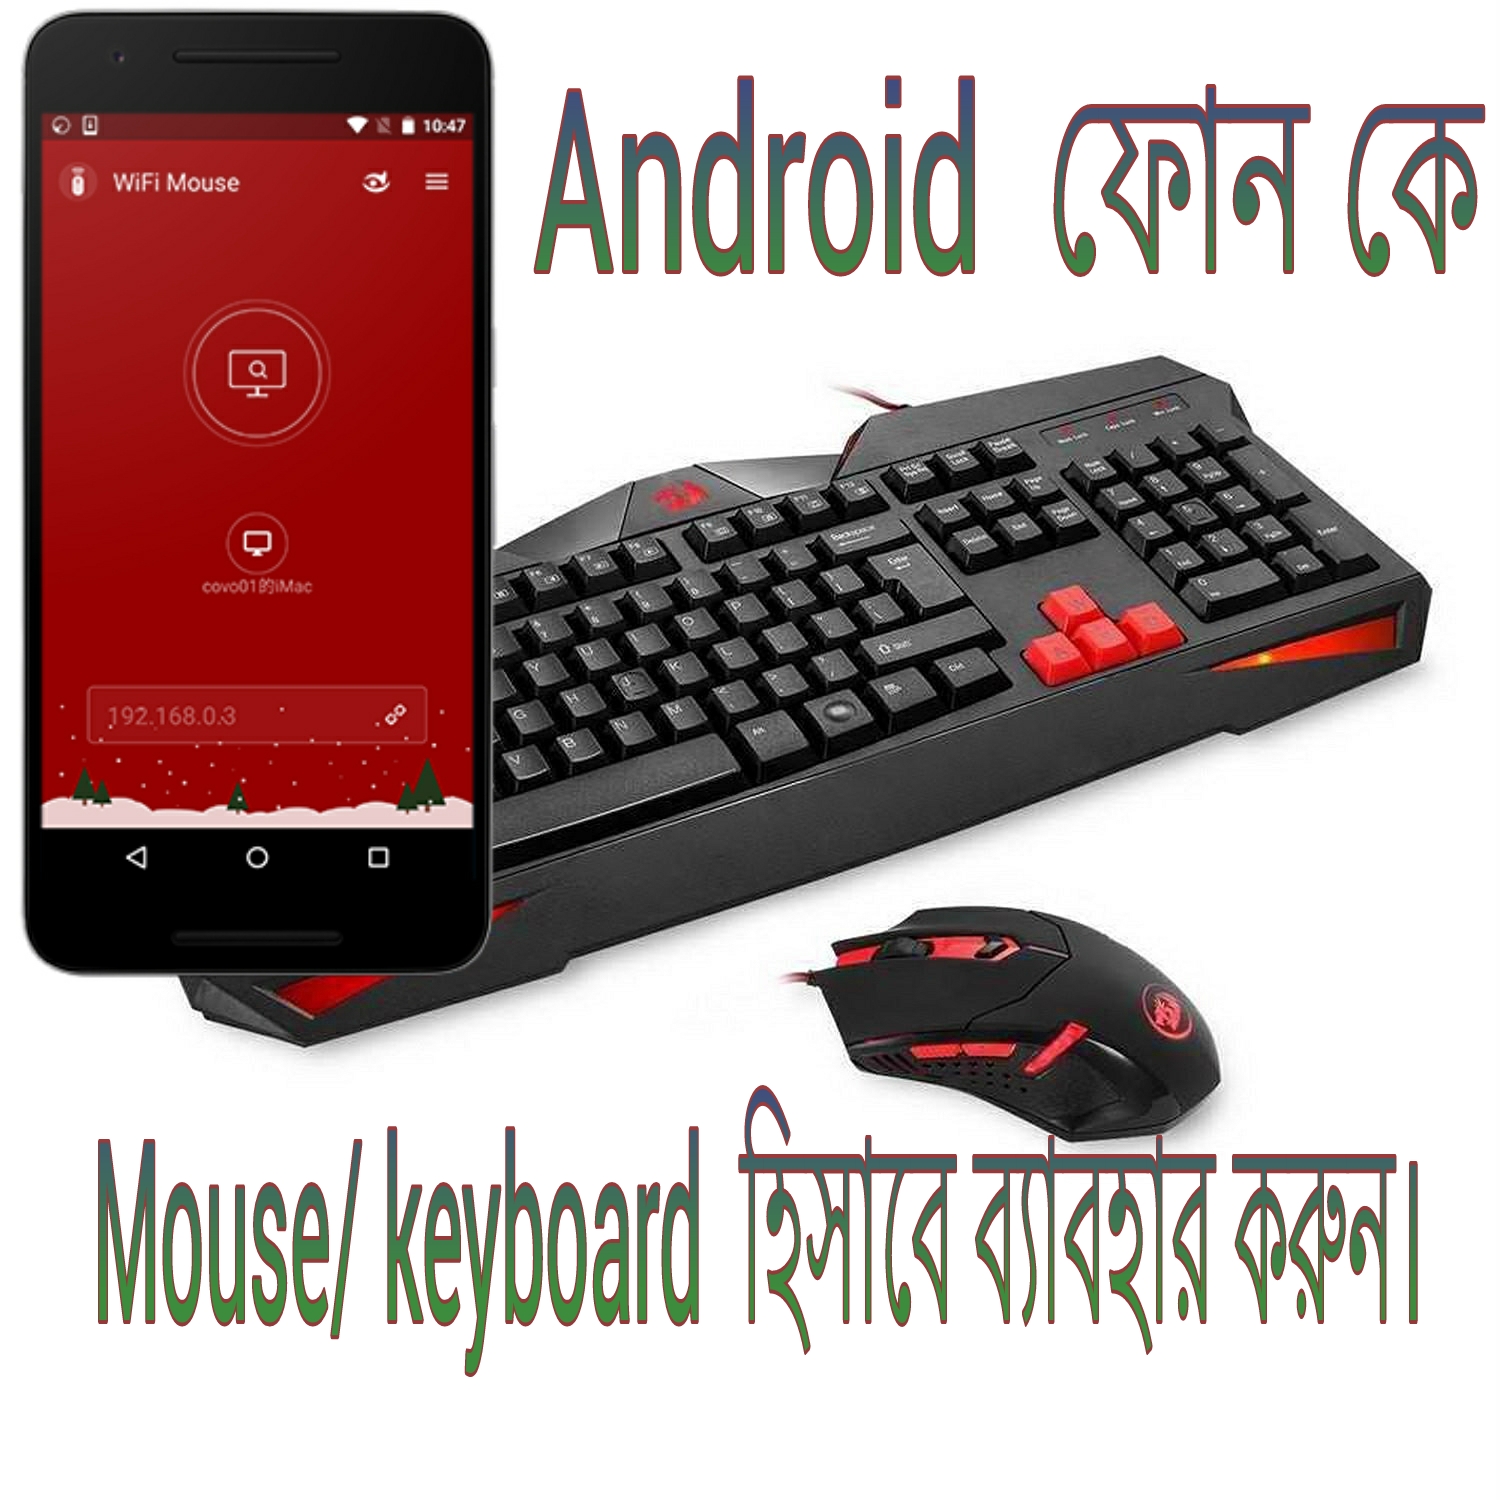 Android phone কে Computer তে Mouse/keyboard  হিসাবে  ব্যবহার করুন 100% working(Don’t miss this)